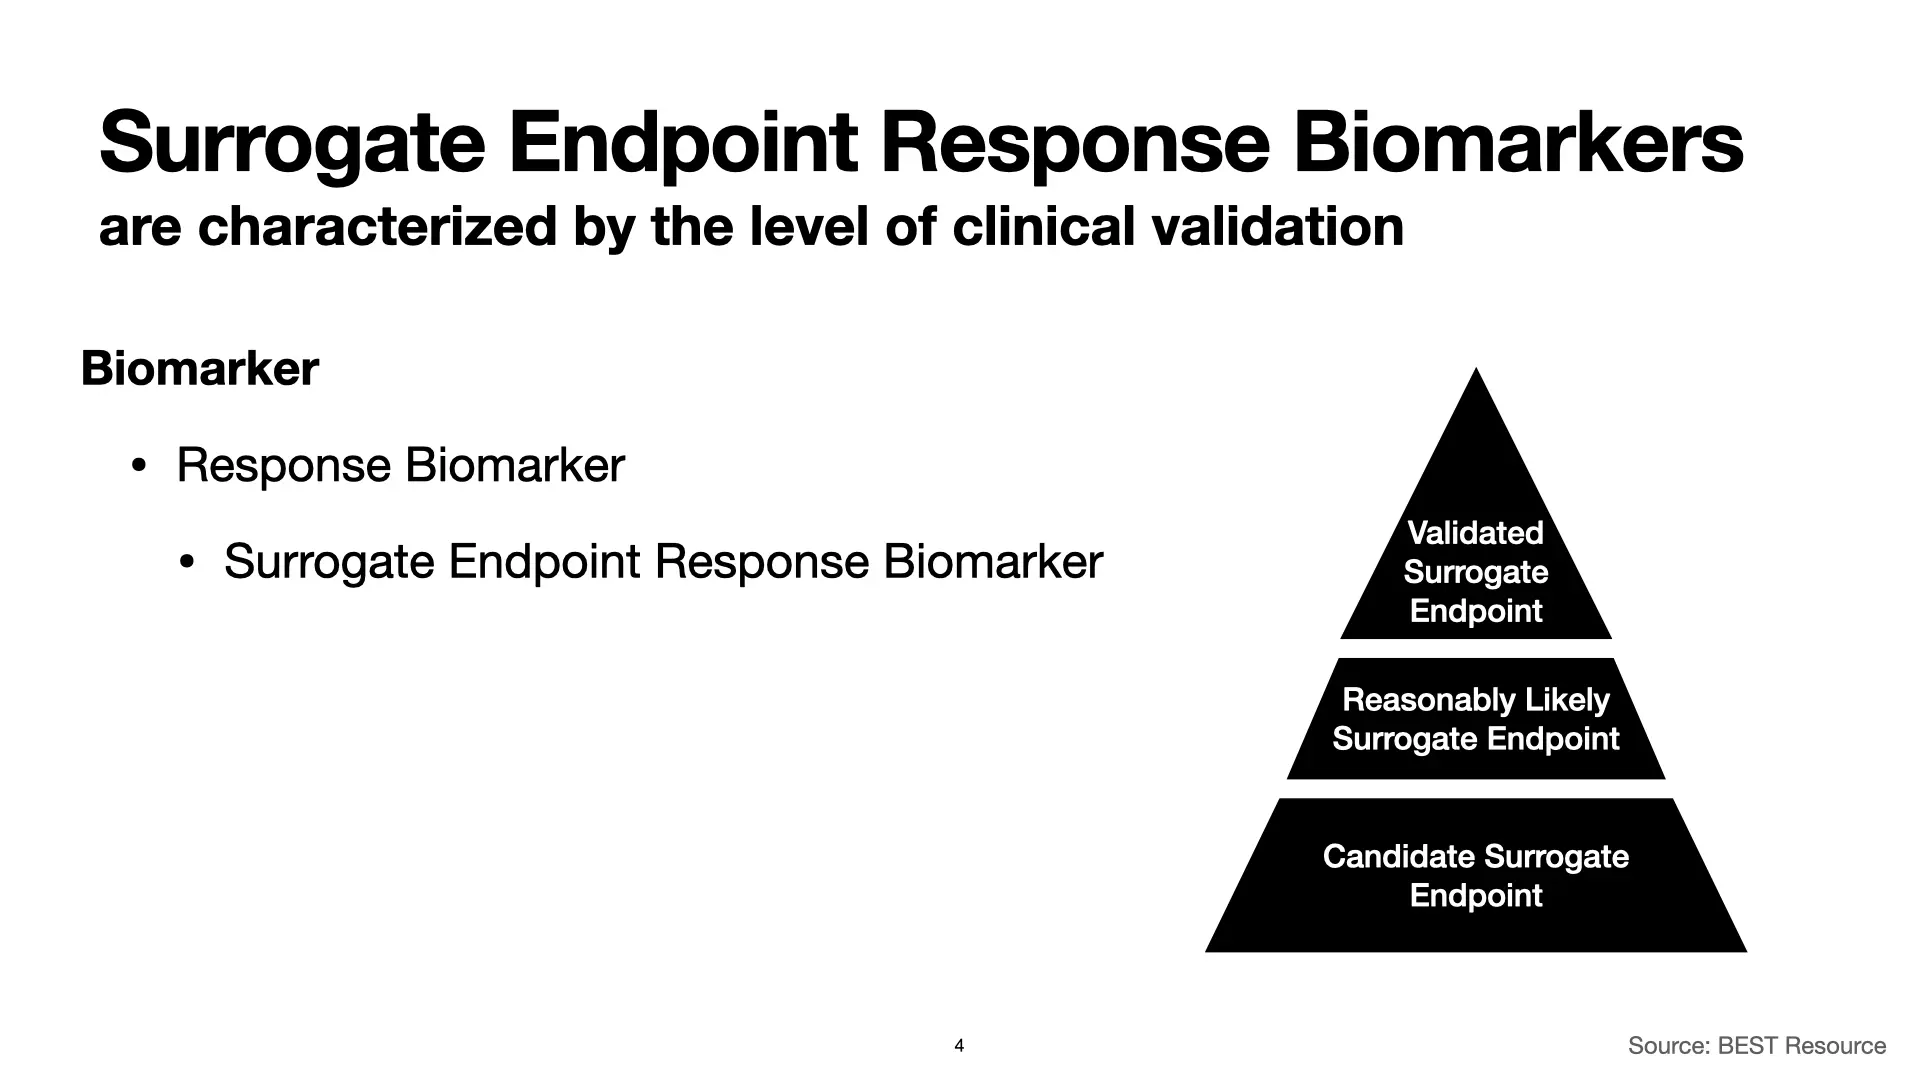 Slide 4: Surrogate Endpoint Response Biomarkers are characterized by the level of clinical validation. This slide shows that within the hierarchy of 'Biomarker', we have 'Response Biomarker.' Within that, we have 'Surrogate Endpoint Response Biomarker'. Within that, a pyramid graphic shows three levels, starting with 'Validated Surrogate Endpoint' at the top, 'Reasonably Likely Surrogate Endpoint' in the middle, and 'Candidate Surrogate Endpoint' at the base. Source: BEST Resource.